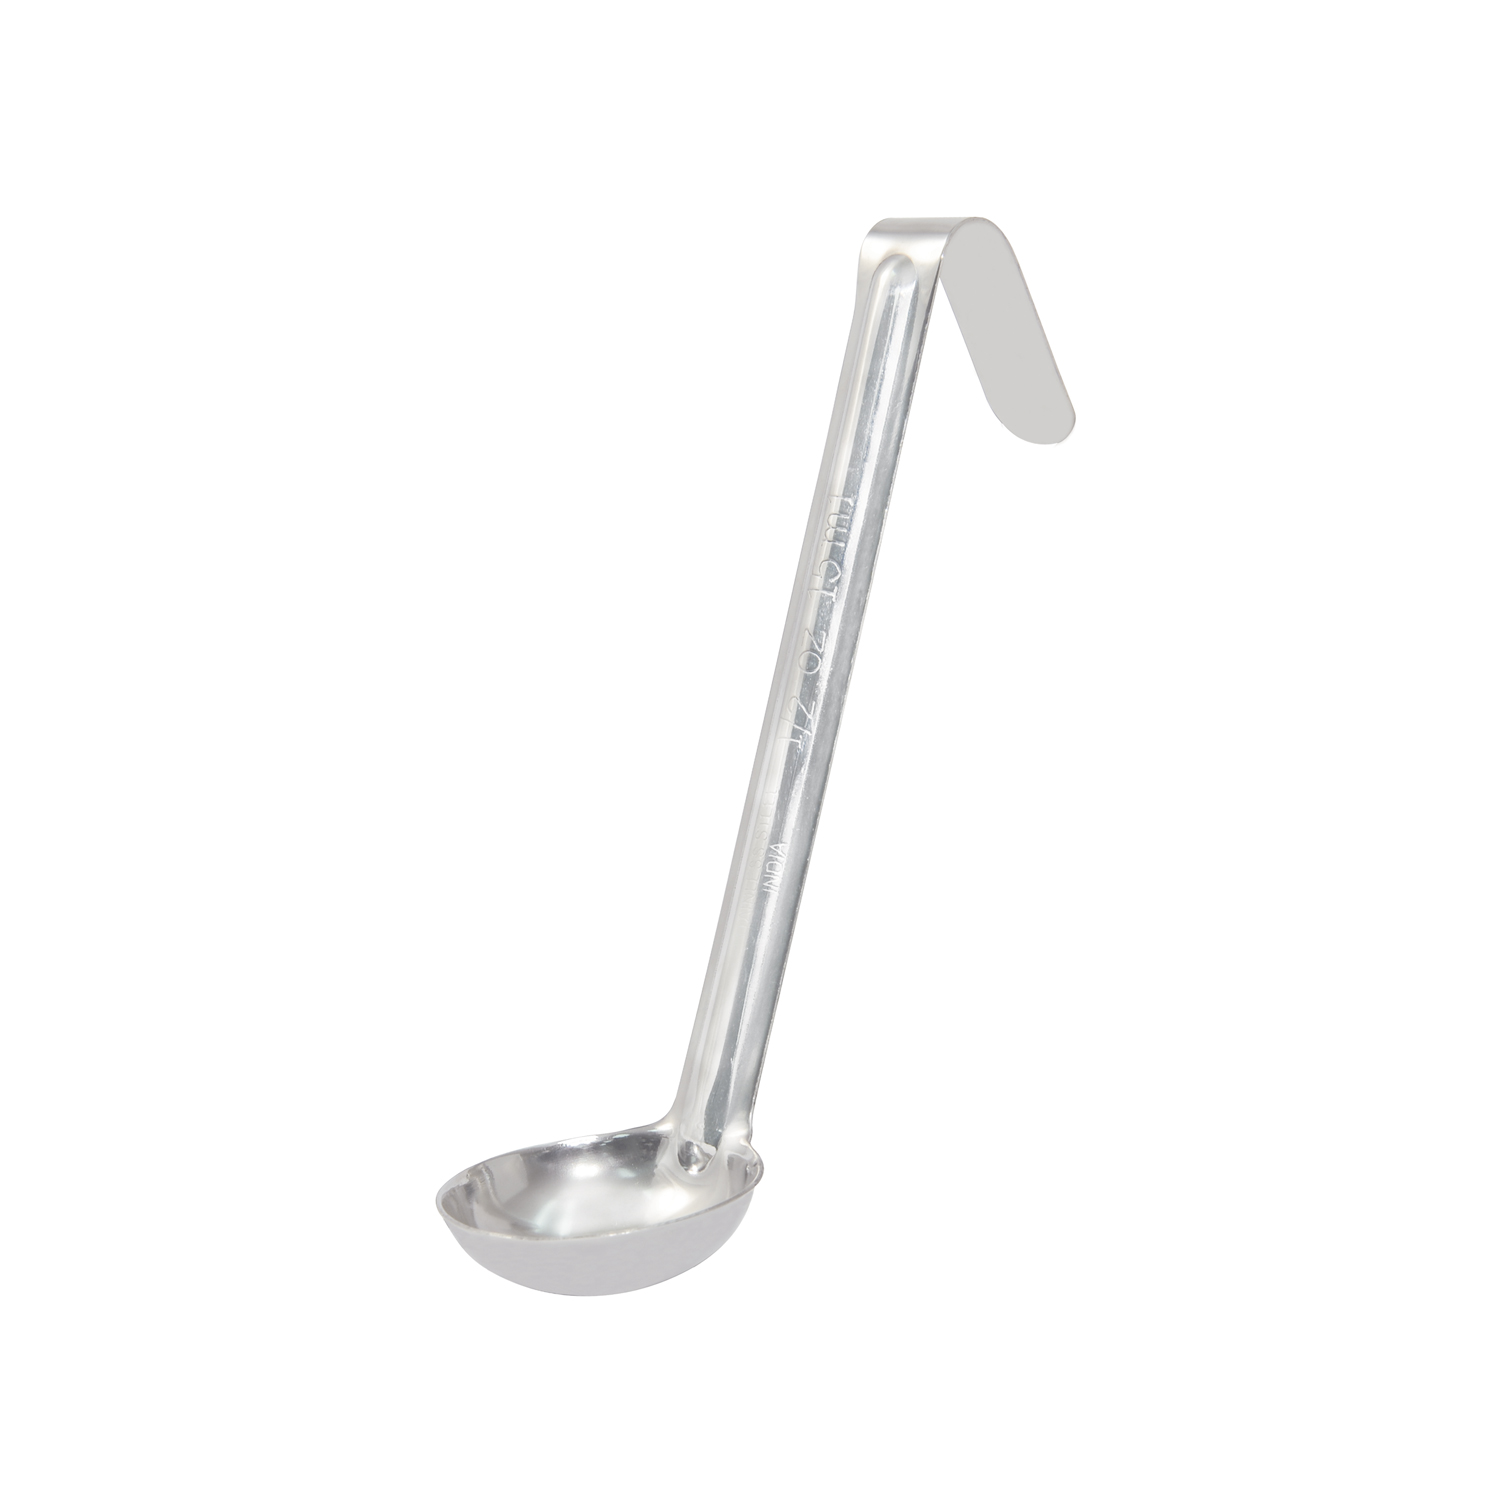 CAC China SLD6-05 One-Piece Stainless Steel Ladle 6" Handle 0.5 oz.